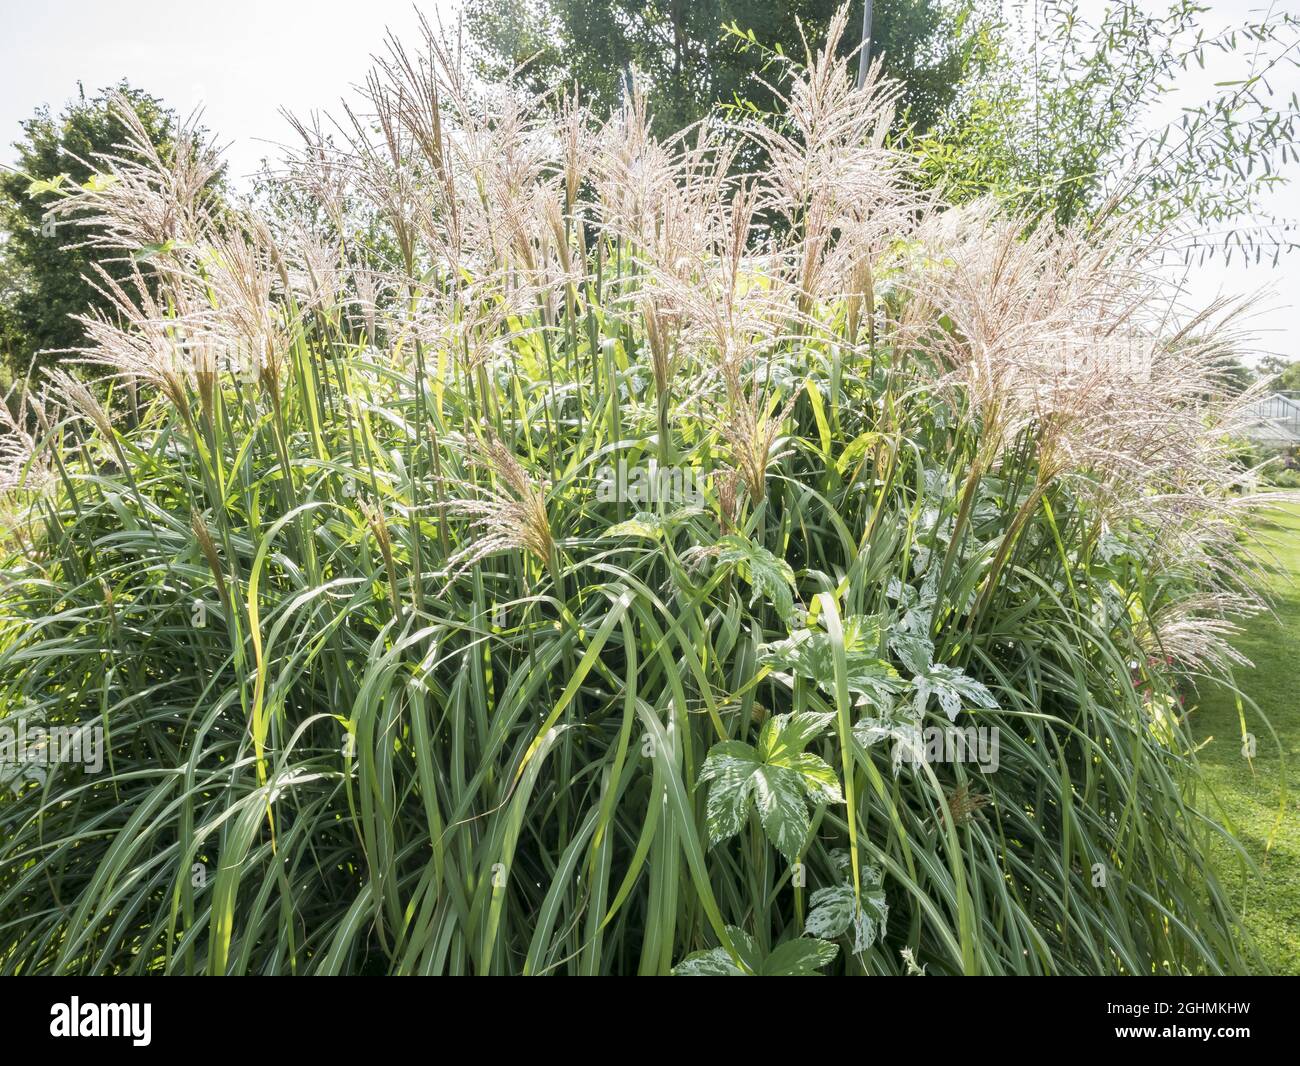 Miscanthus sinensis 'August Feder' Stock Photo - Alamy